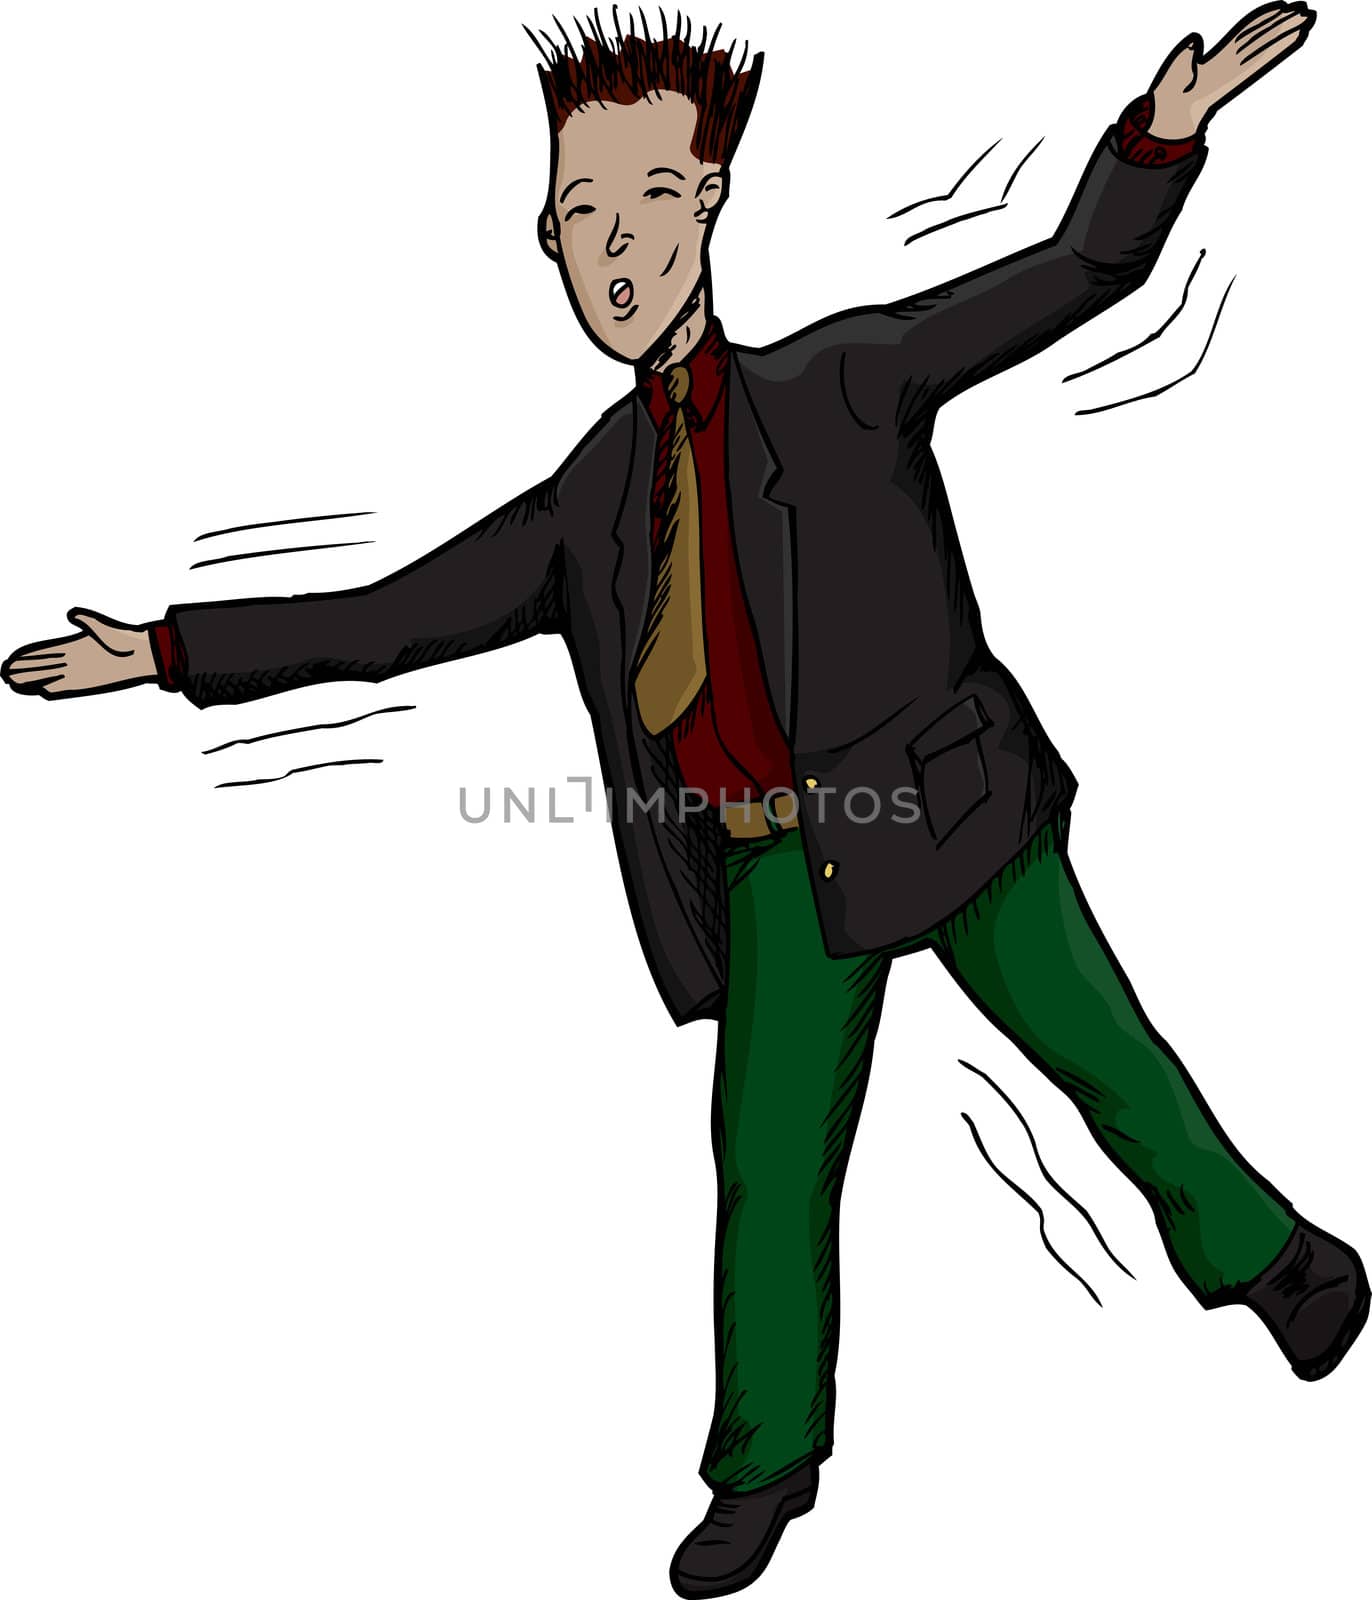 Businessman on one foot losing balance with arms up